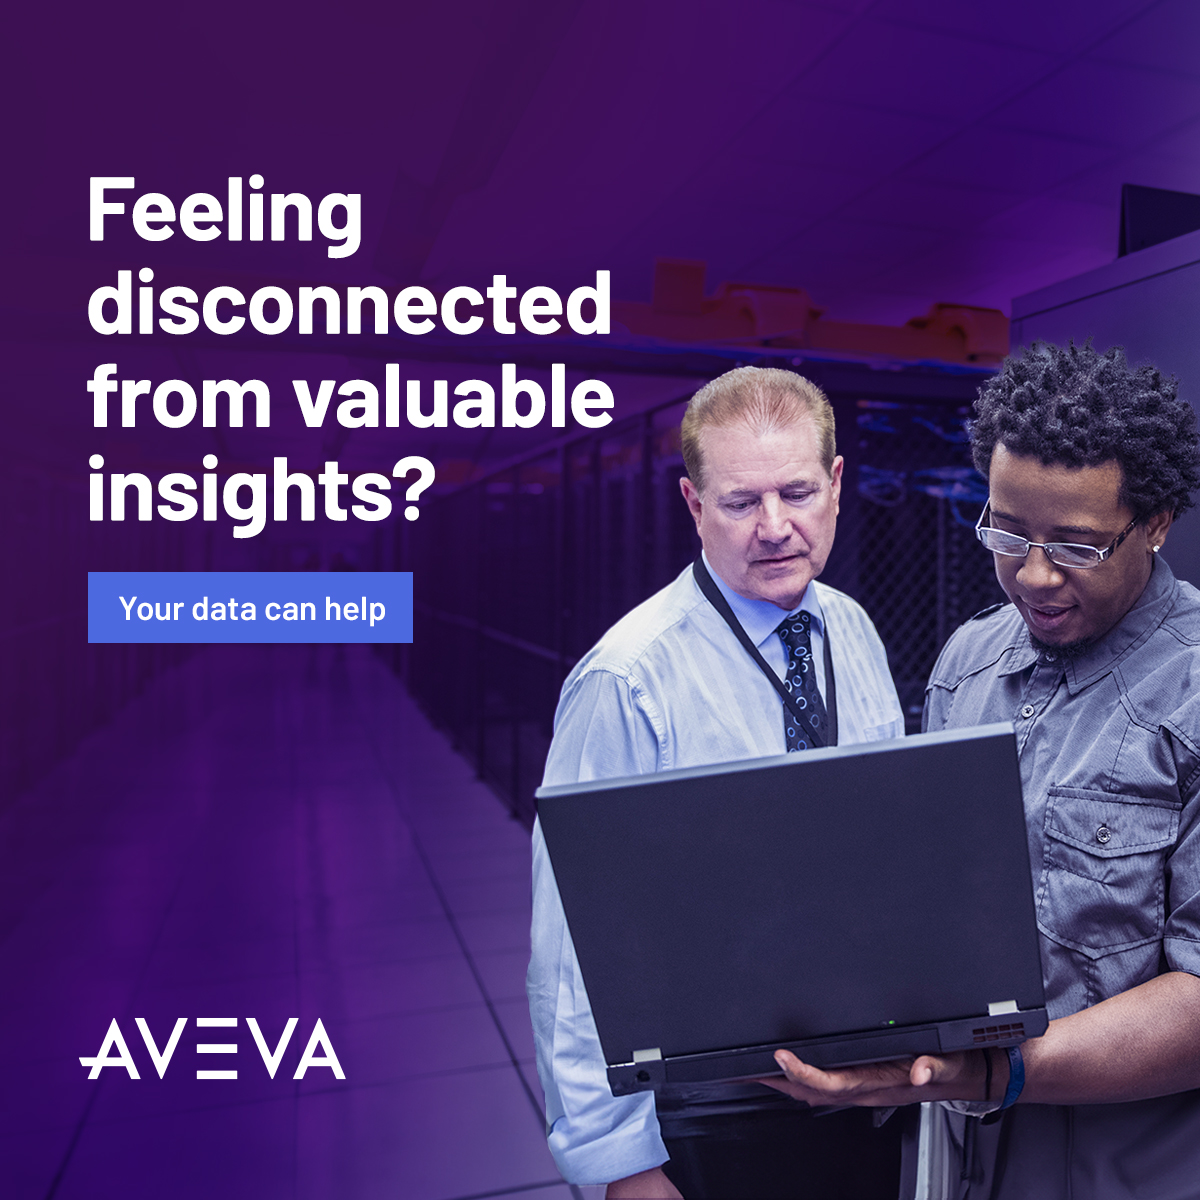 Bridge the gaps in your industrial ecosystem and gain a 360° view of your #Operations for faster, smarter business decisions.

Learn more about AVEVA Connect’s new features and advanced data services . Read the blog ➡️ bit.ly/3y7EH9j #cloud #datasharing #AVEVAConnect